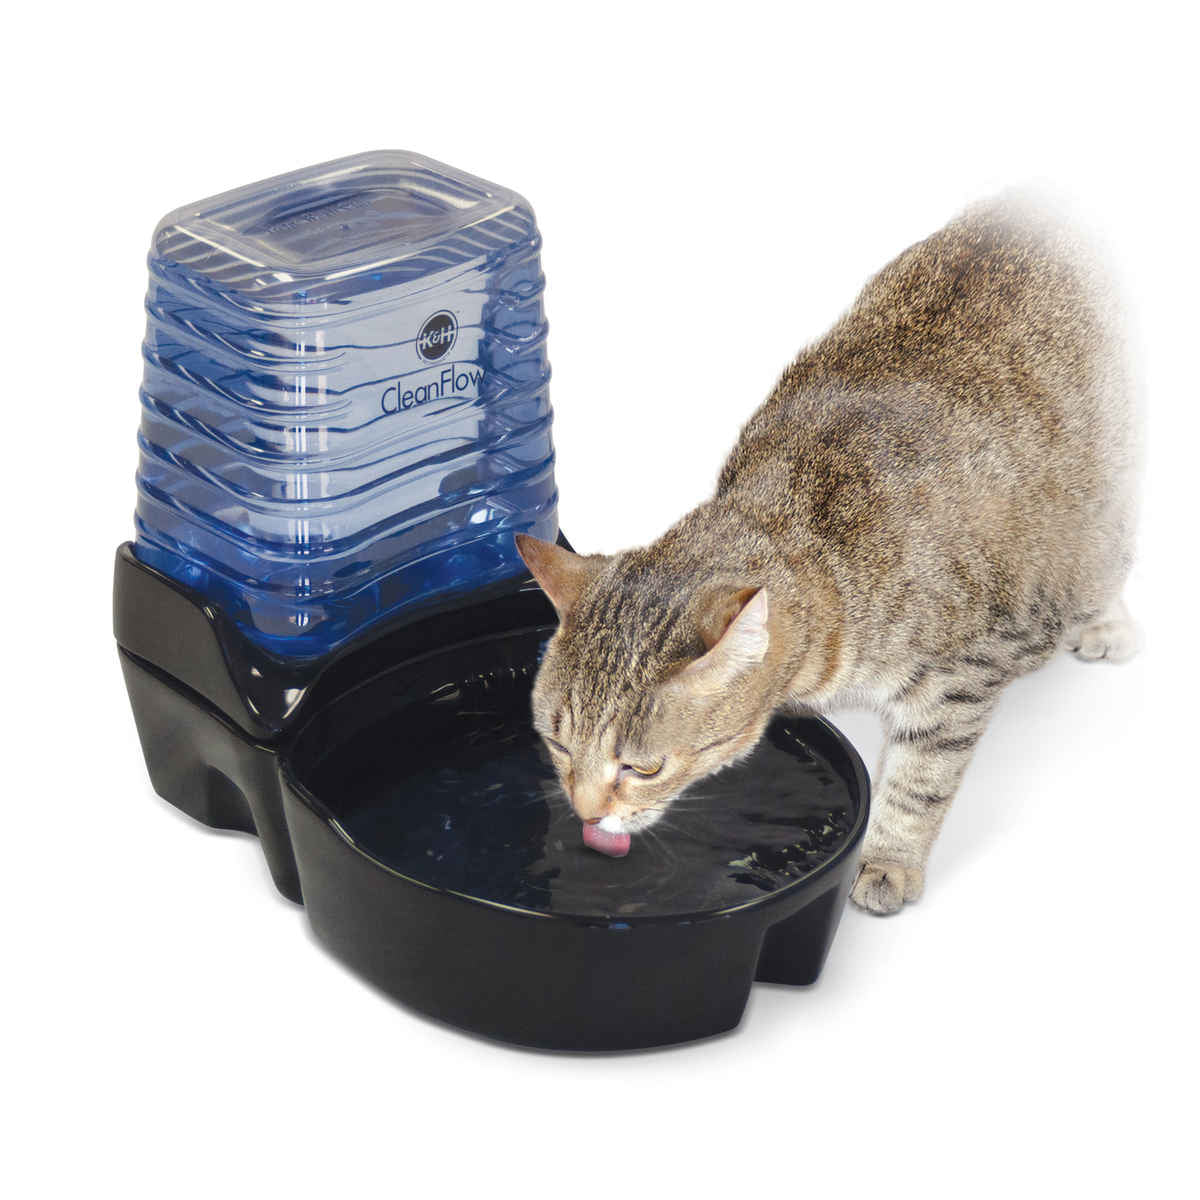 K&h Pet Products Kh2572 Cleanflow Cat Ceramic Fountain With Reservoir 170 Oz.